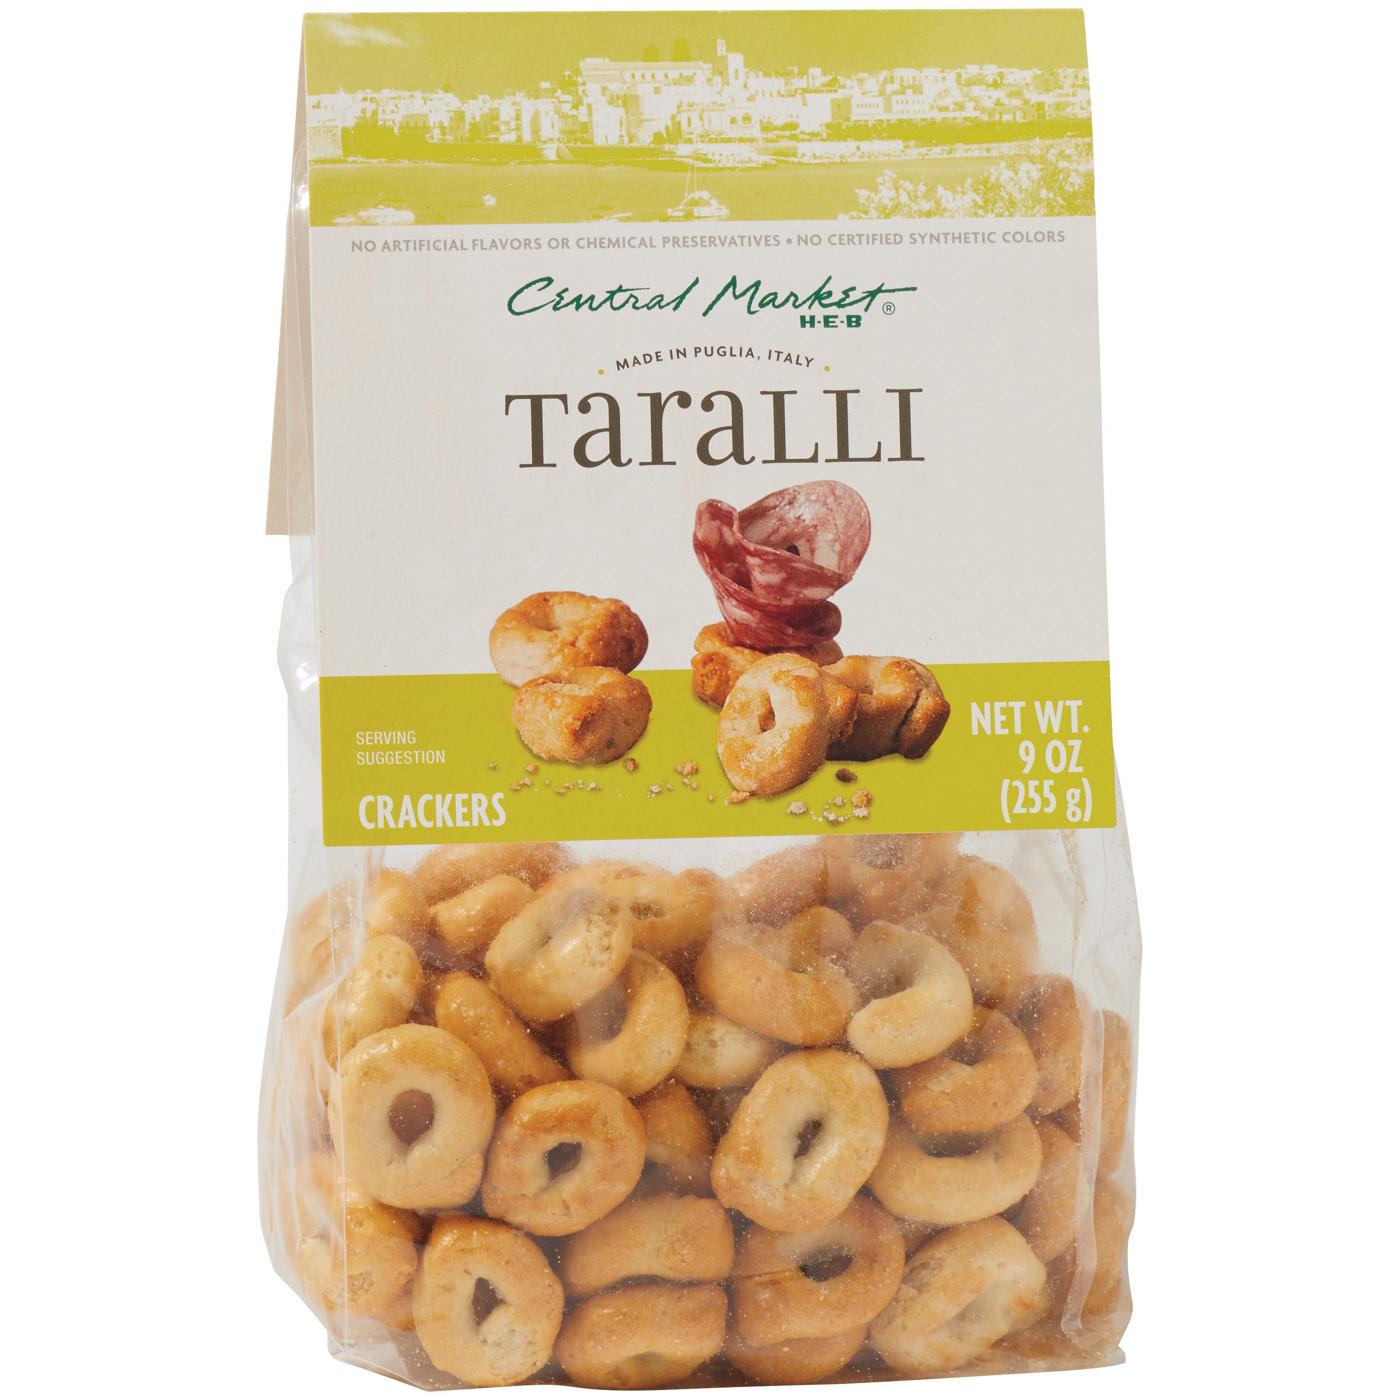 Central Market Taralli Crackers; image 2 of 2